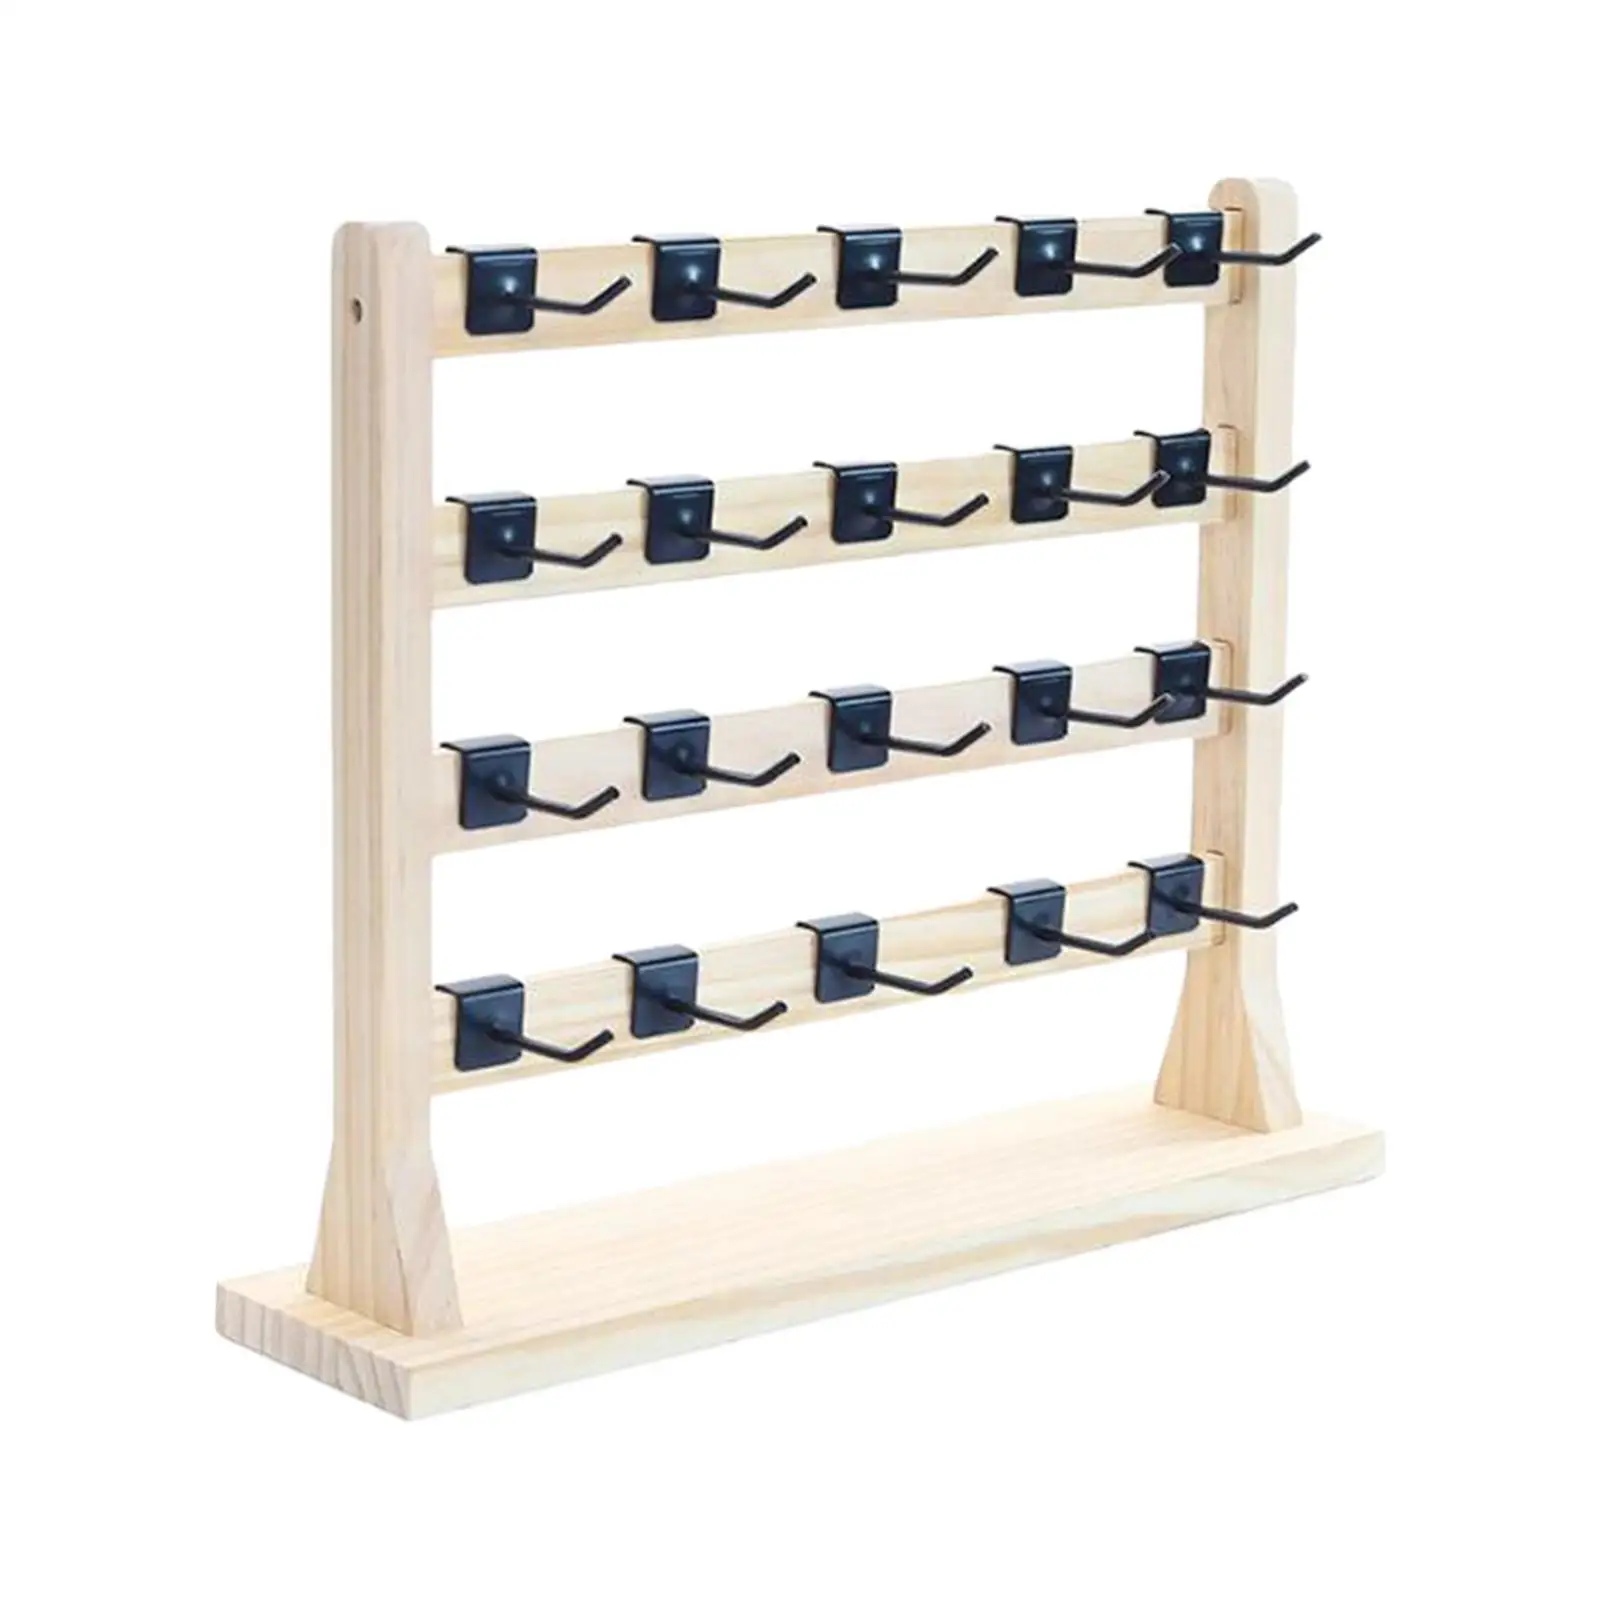 Earrings Display Stand with Hooks 4 Tiers Decoration Bracelet Display Holder for Desktop